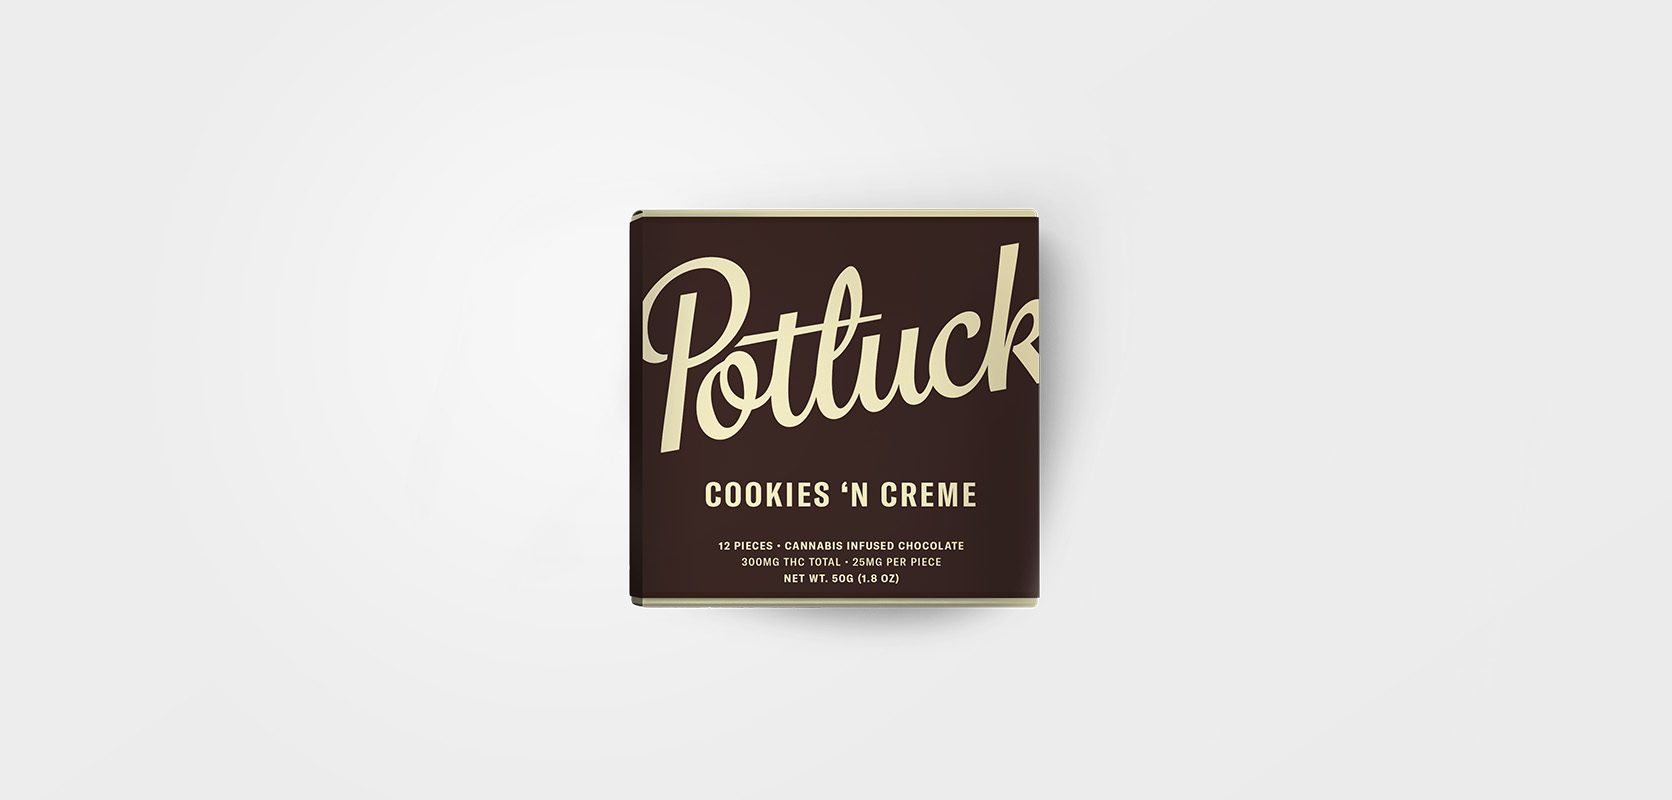 Buy Potluck Weed Chocolate Bars from Low Price Bud dispensary for baked edibles in Canada. bc online dispensary. cheapest weed online canada. order weed canada.